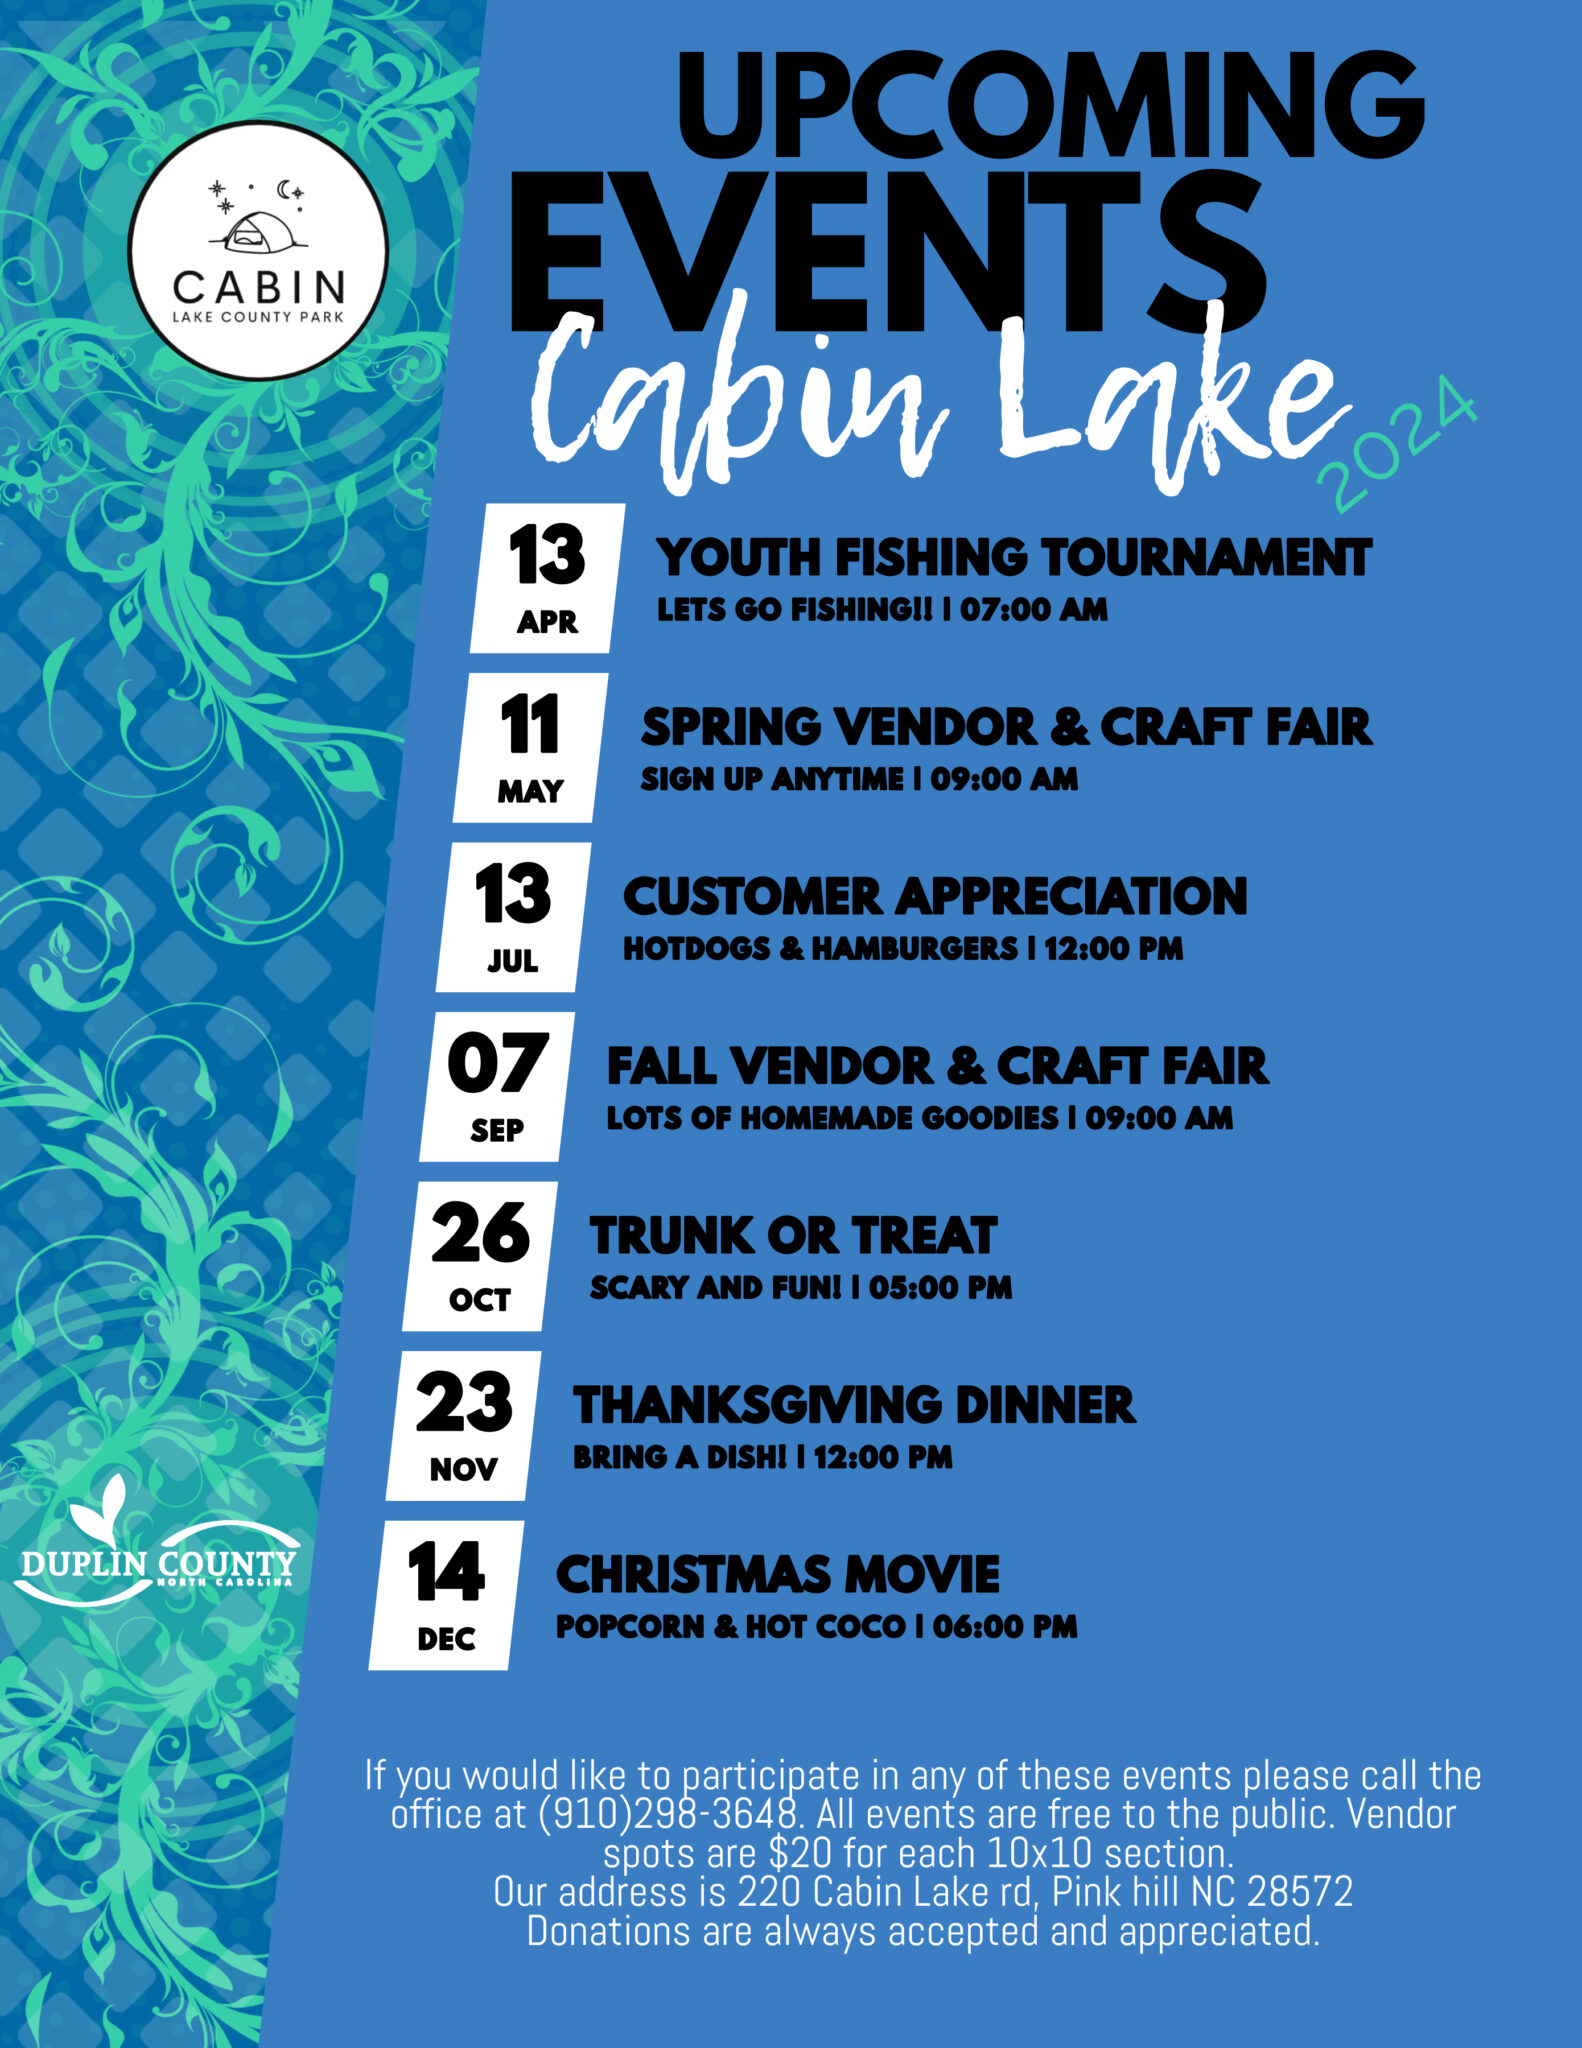 Cabin Lake upcoming events schedule flyer